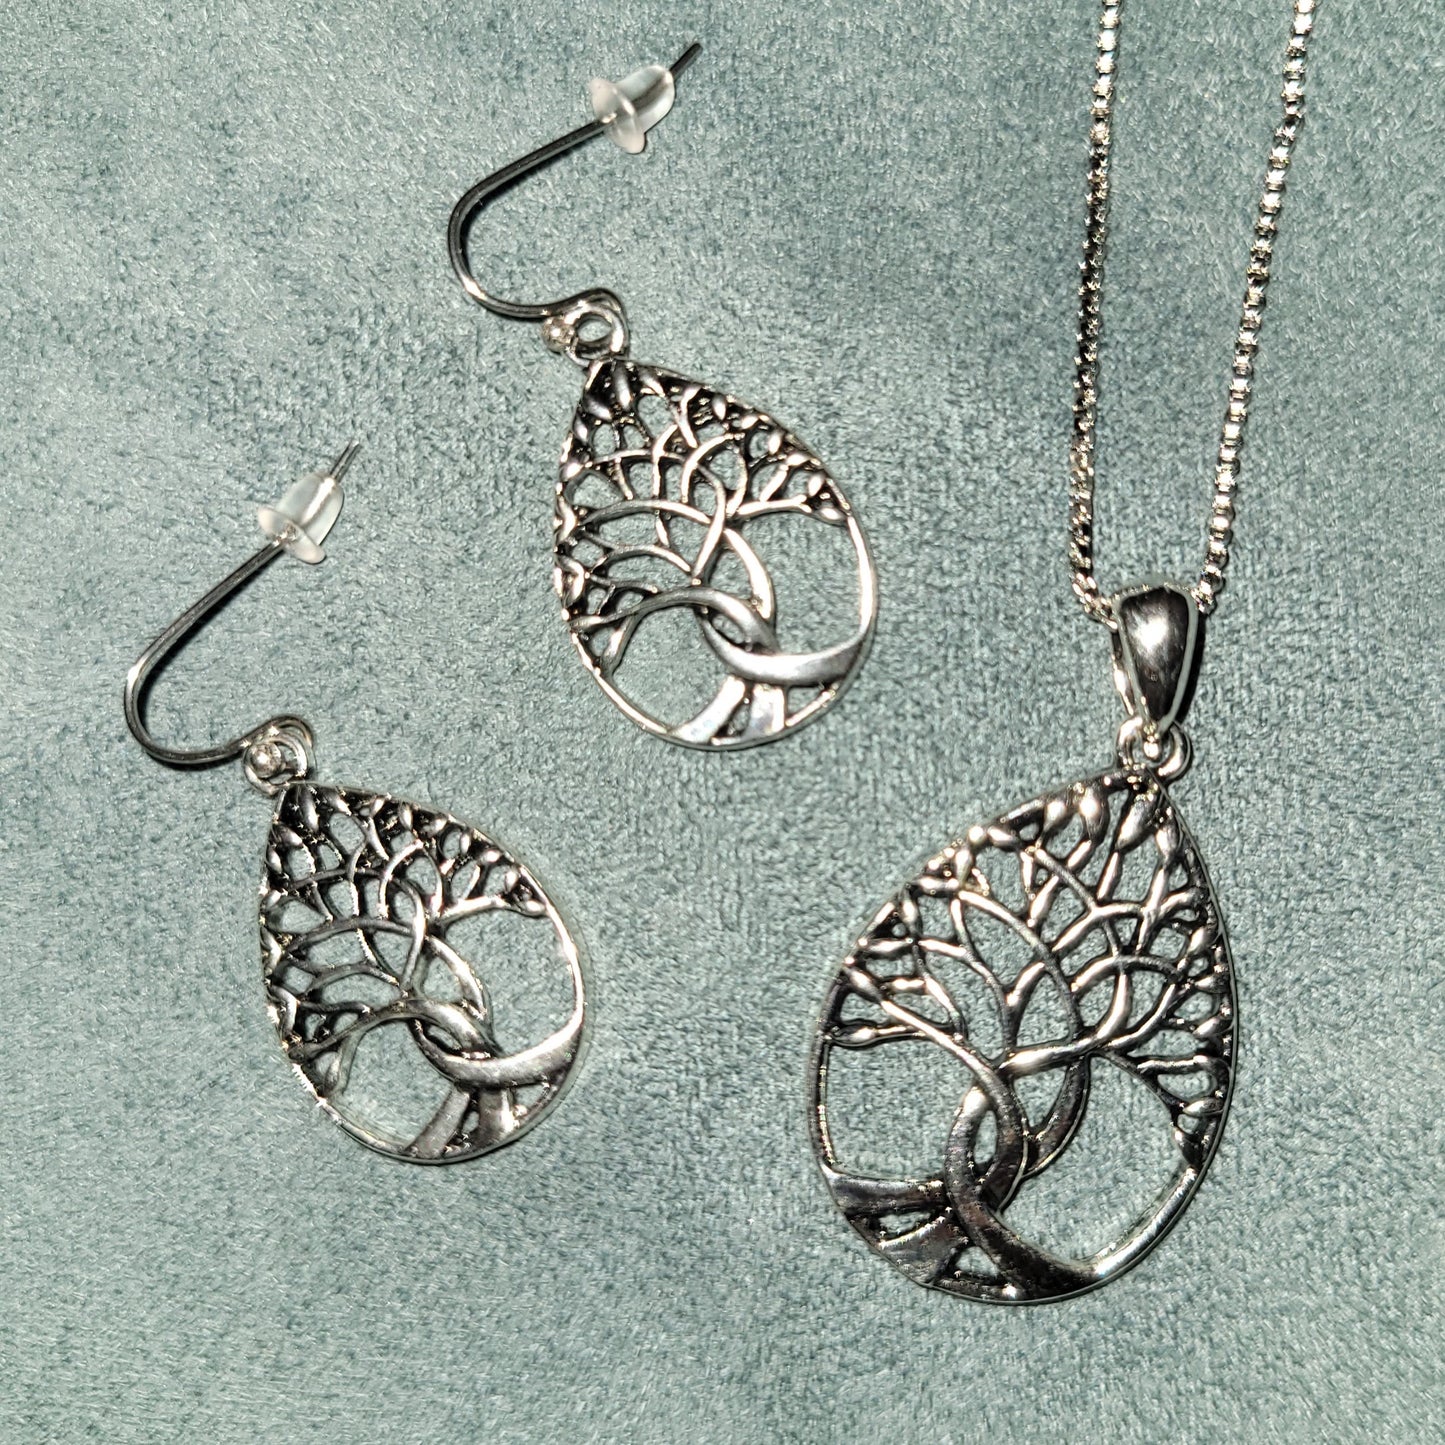 Necklace - Tree of Life